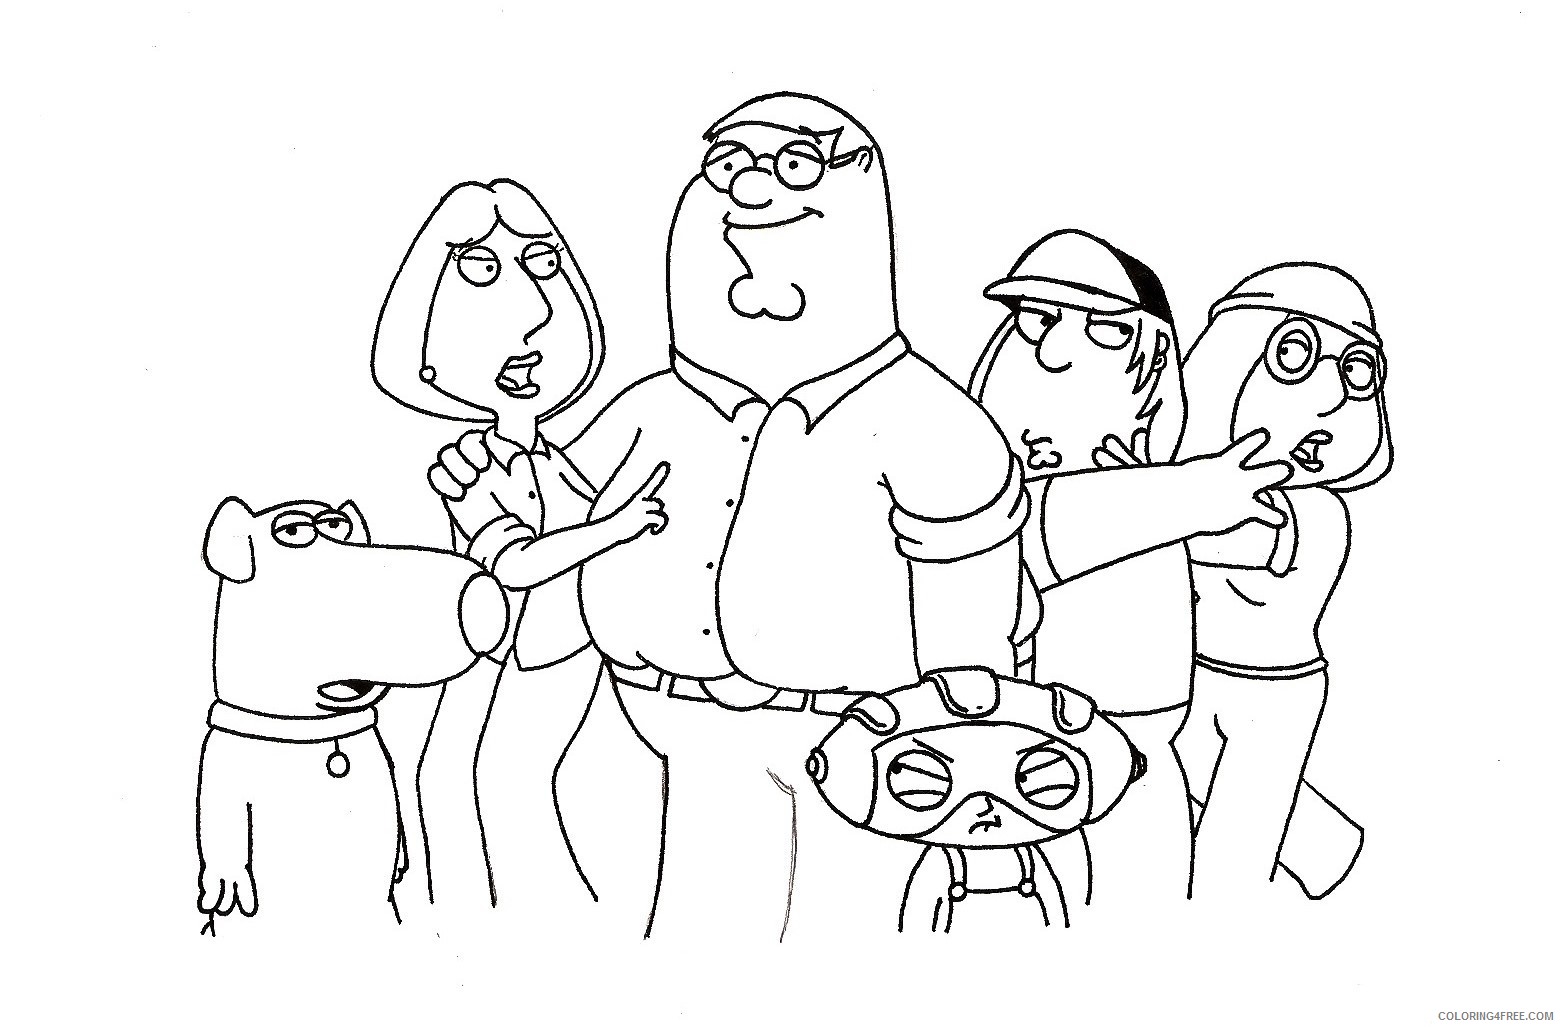 Family Guy Coloring Pages Cartoons family guy 001 Printable 2020 2742 Coloring4free